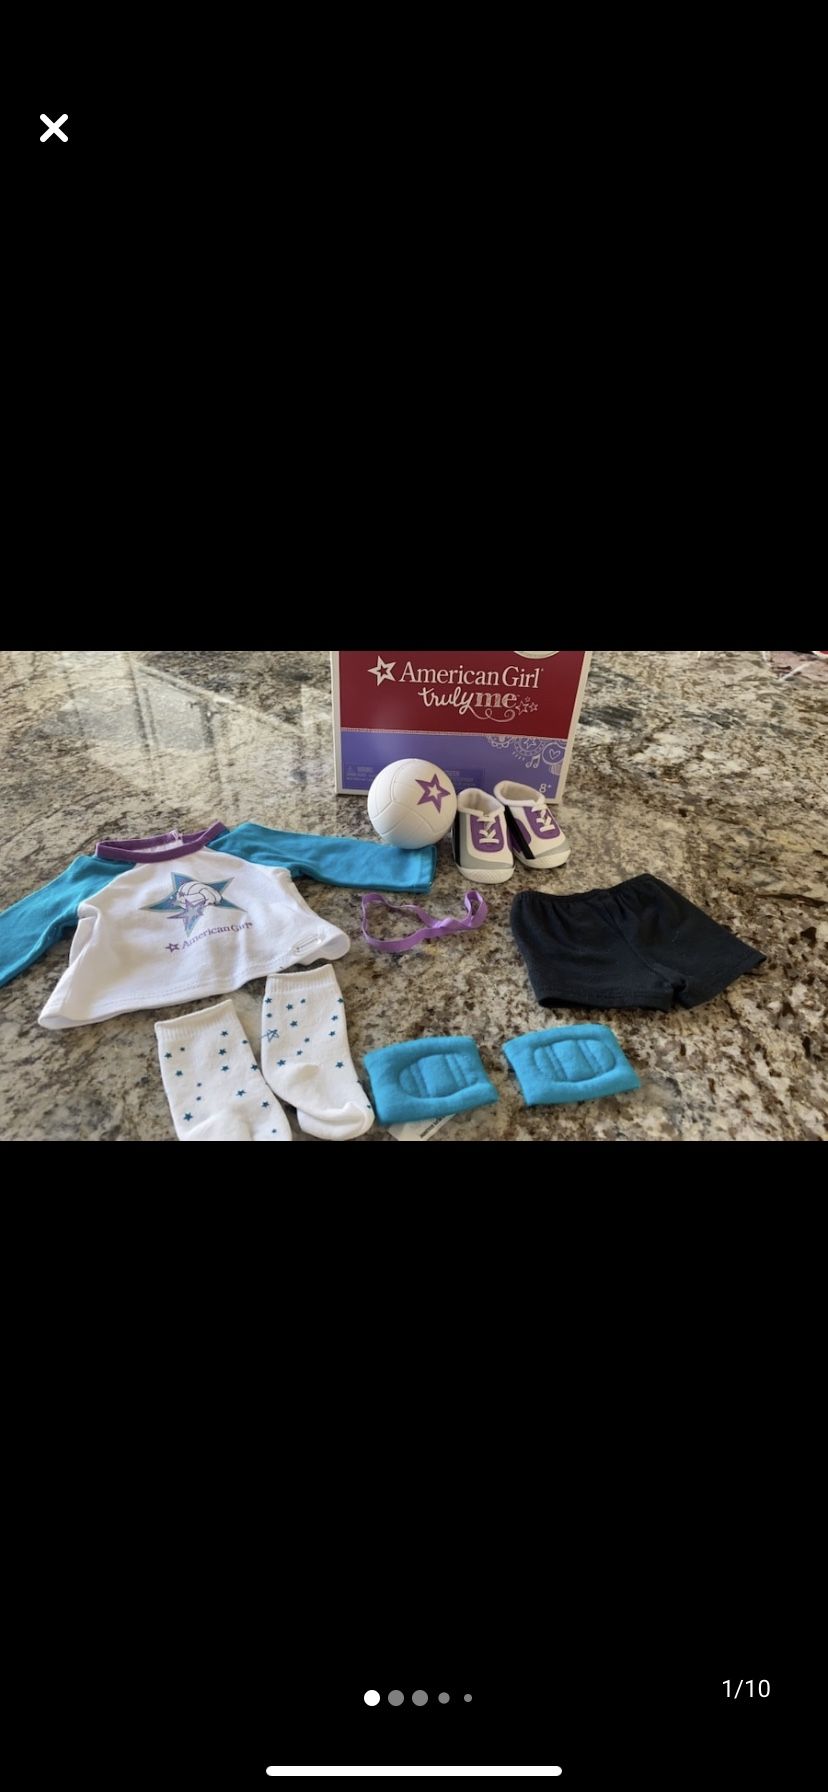 -retired- American girl doll star player volleyball outfit